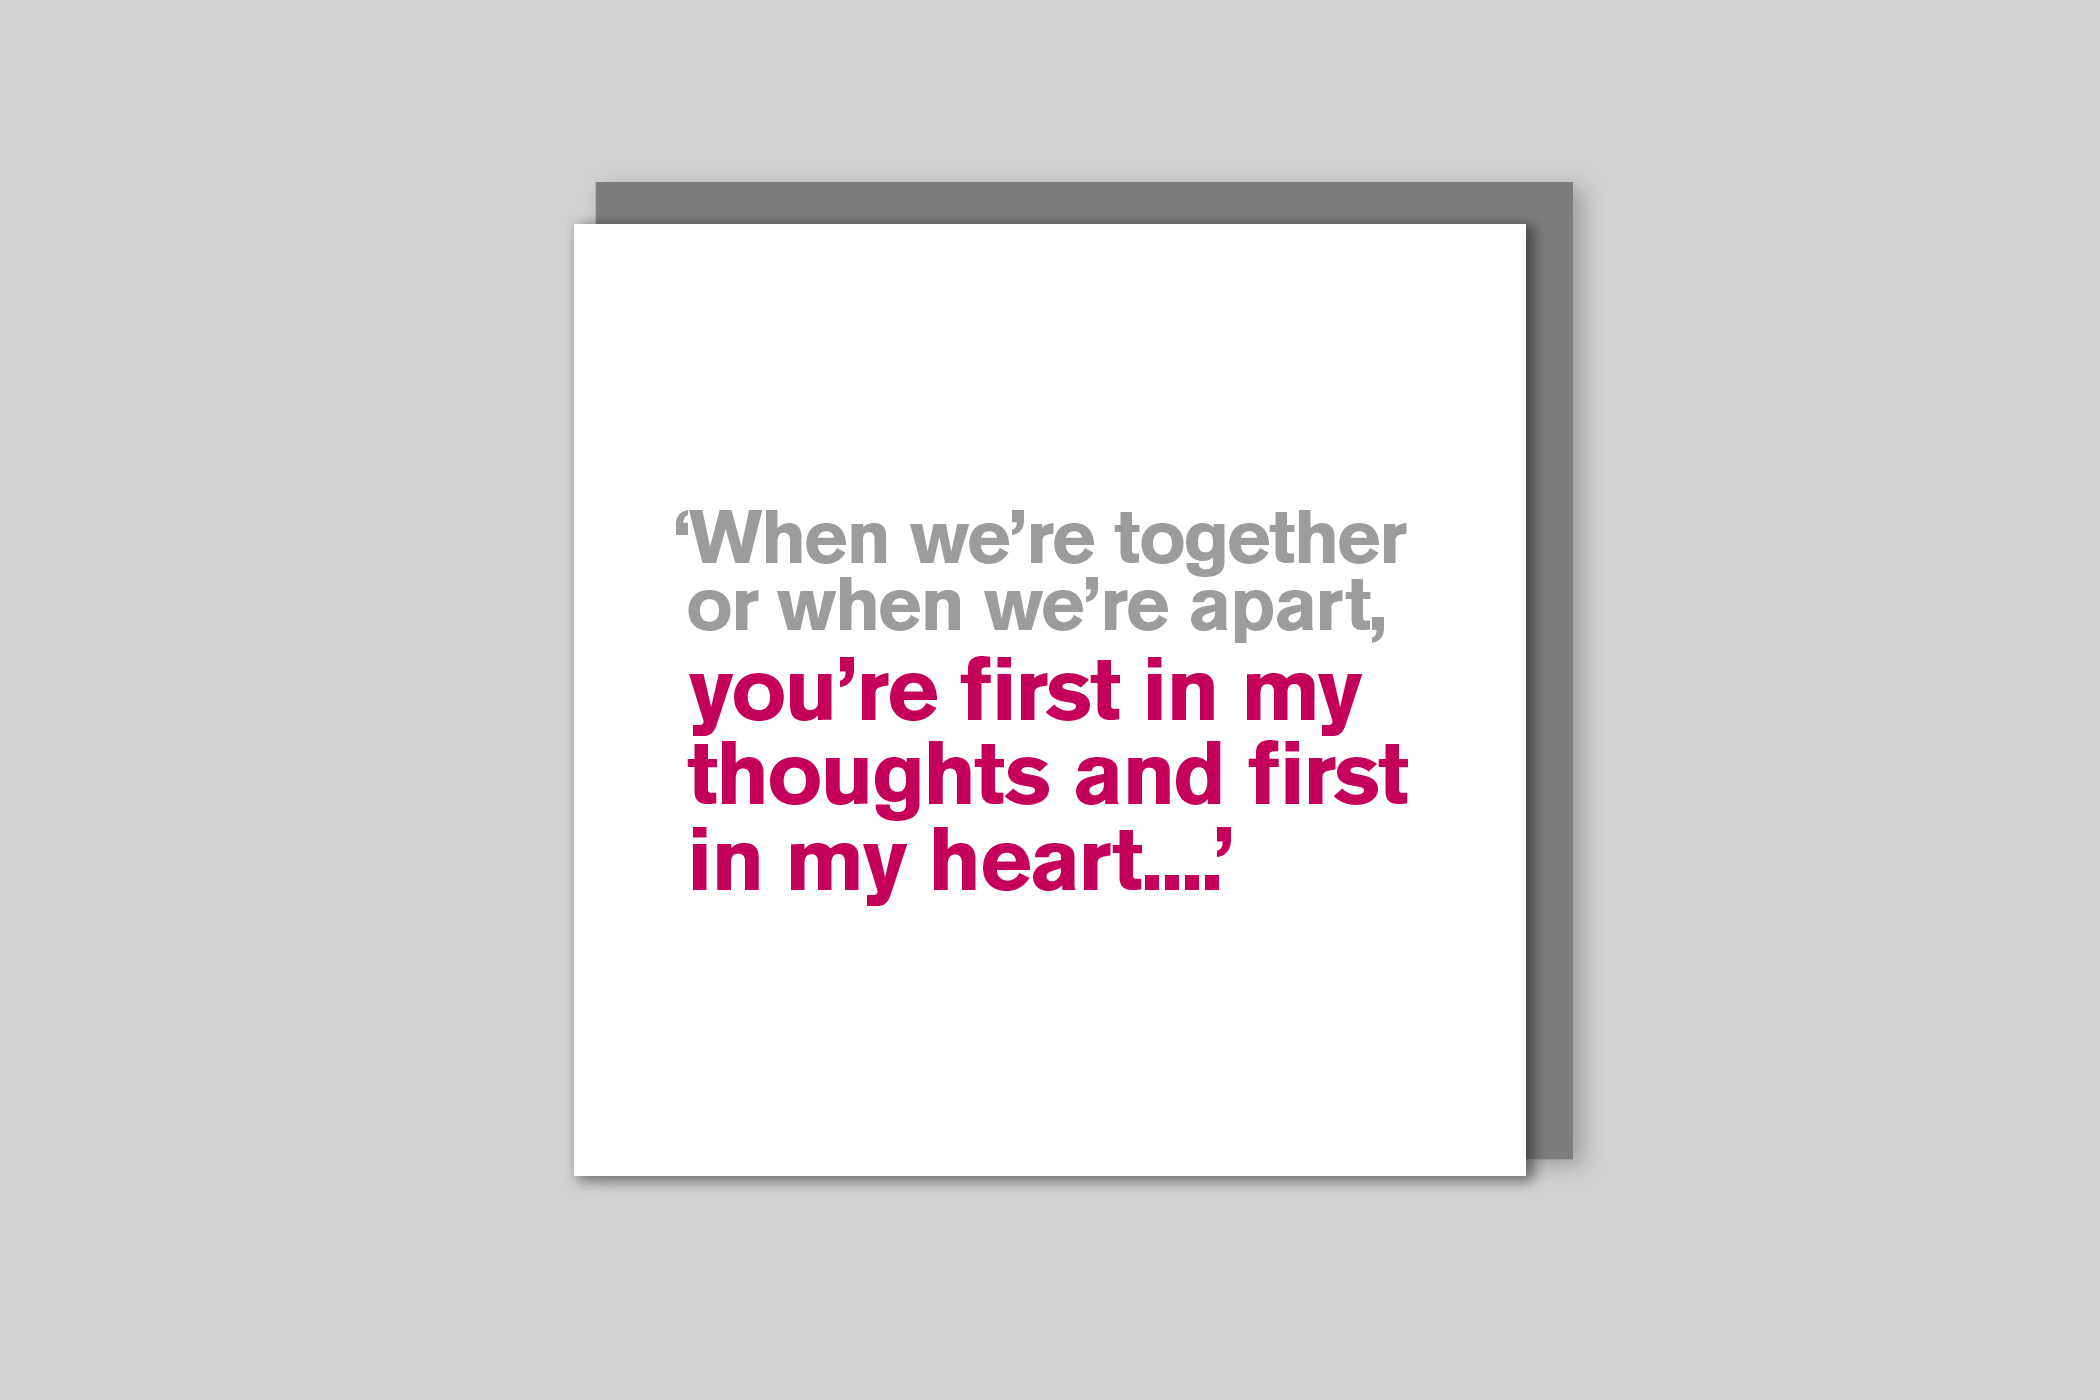 When We're Together anniversary card from Lyric range of quotation cards by Icon, back page.